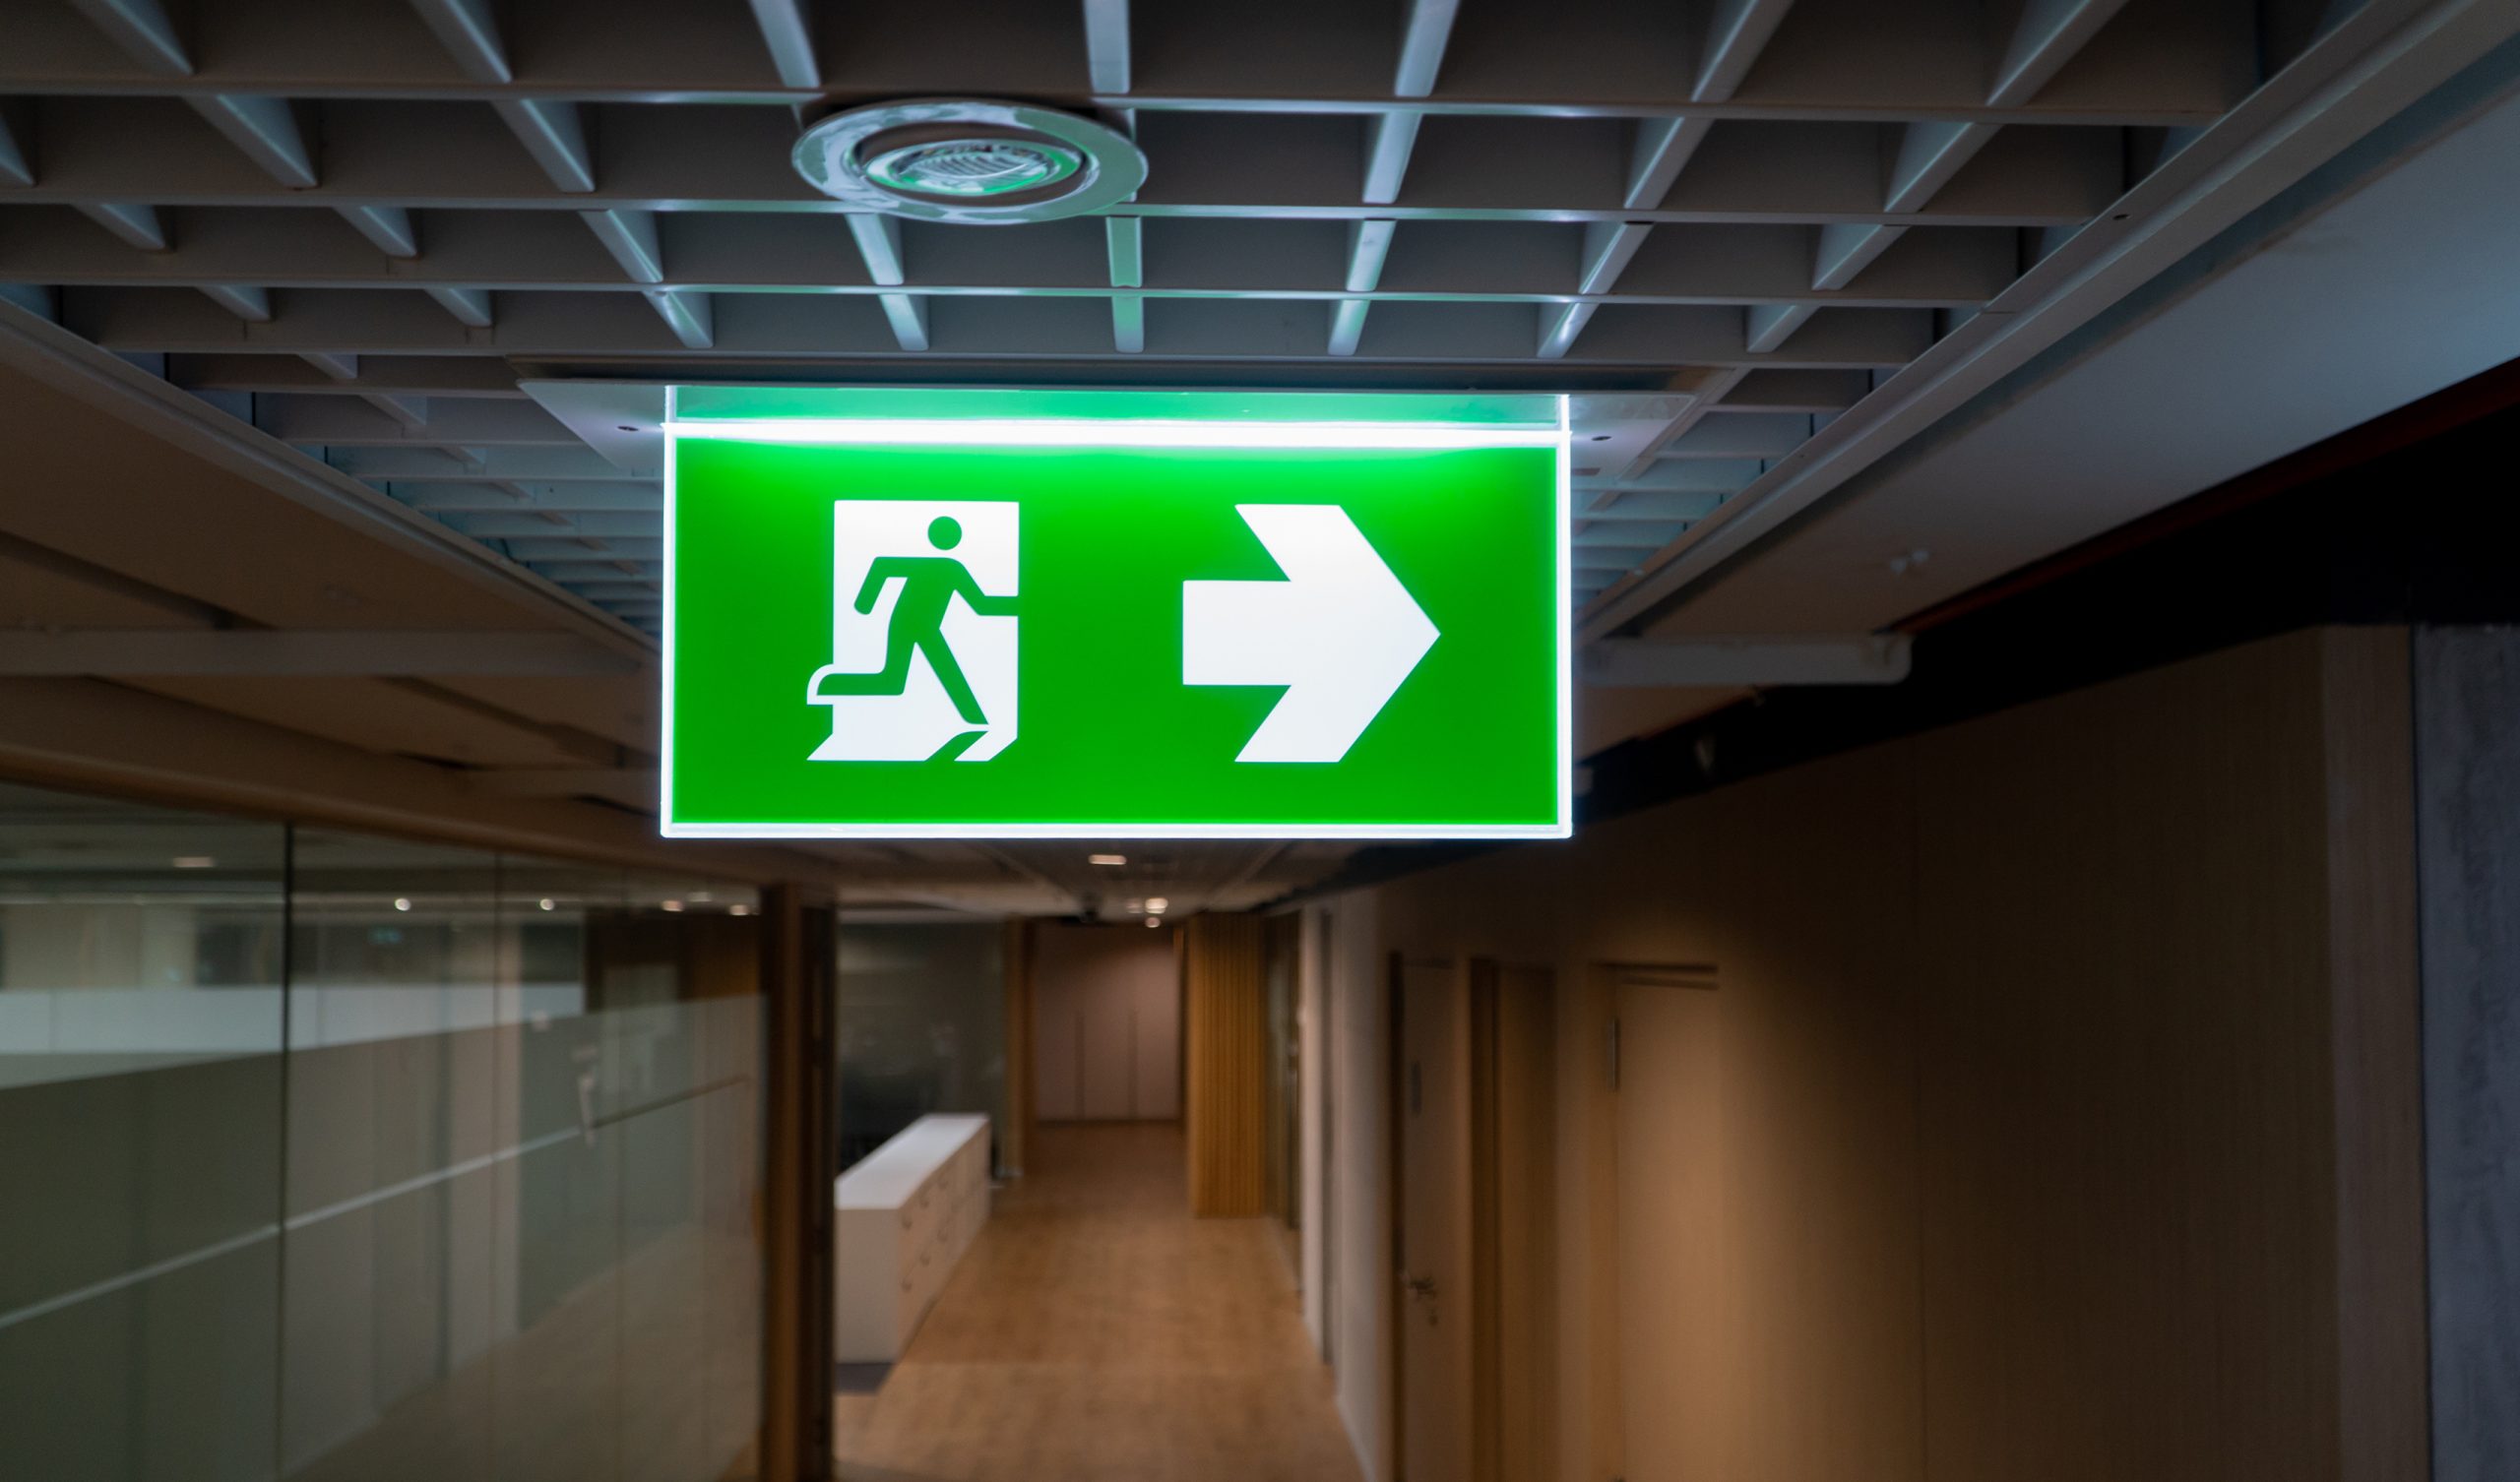 What is included in an emergency lighting system? - Advanced Fire Protection